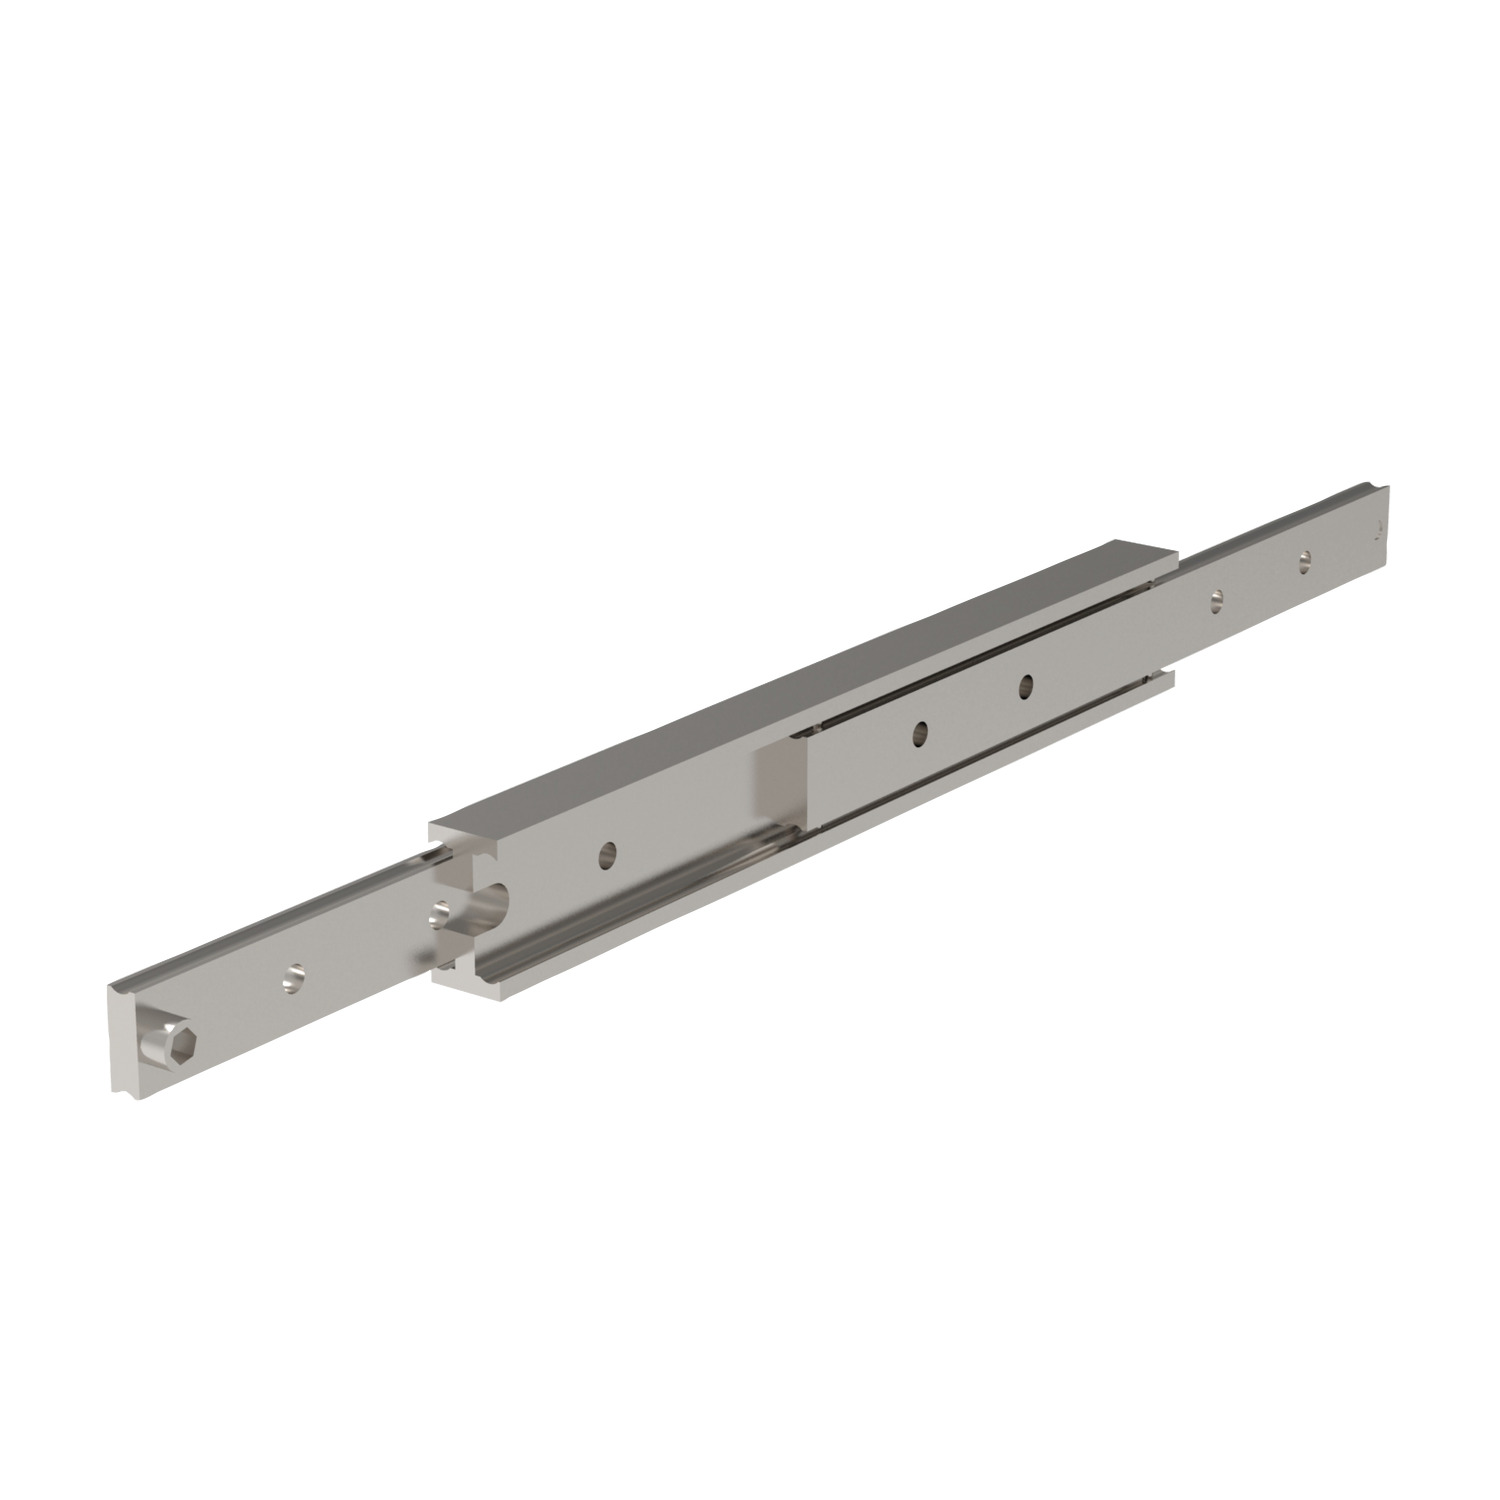 Stainless AISI 316 Slides Ideal for applications requiring a high degree of corrosion resistance.